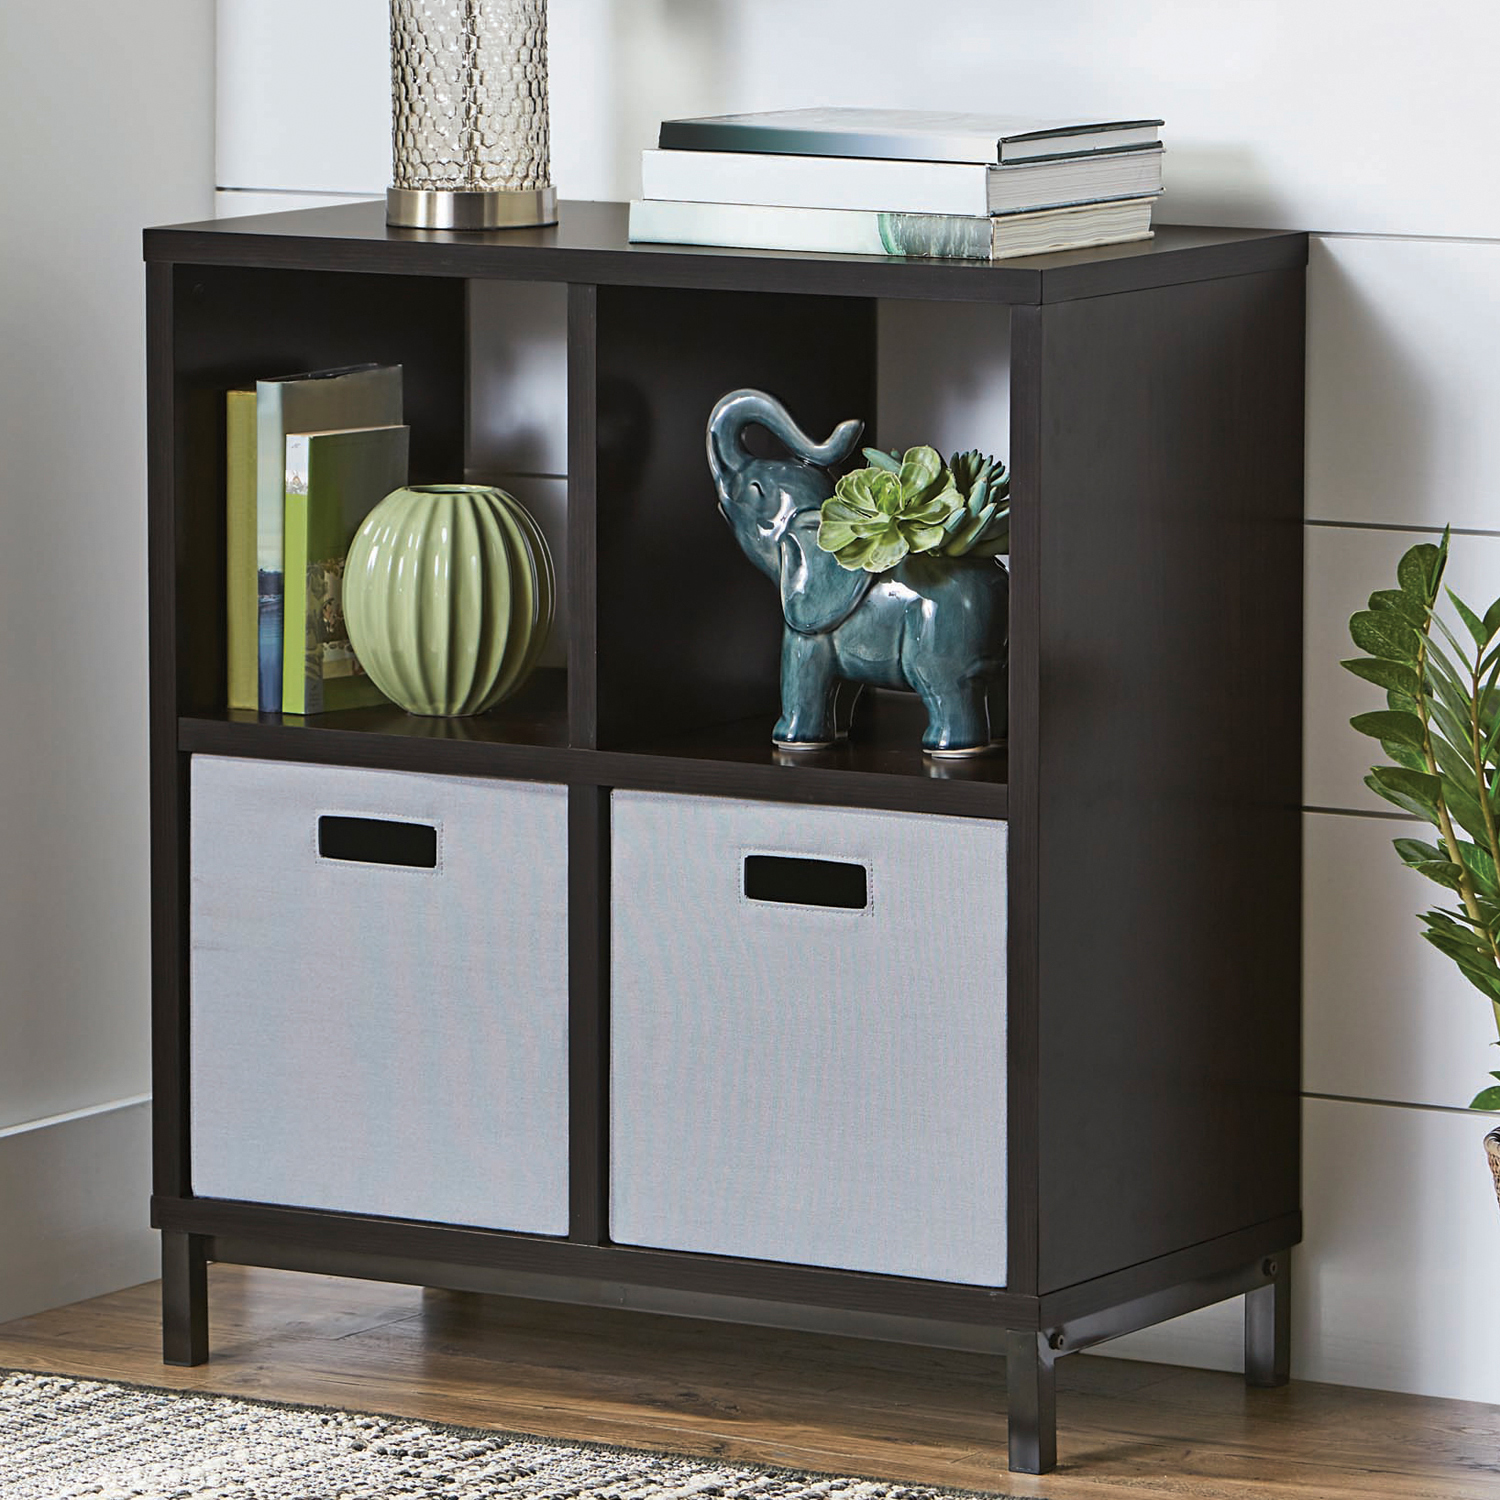 Better Homes & Gardens 4-Cube Organizer with Metal Base, Espresso - image 2 of 6